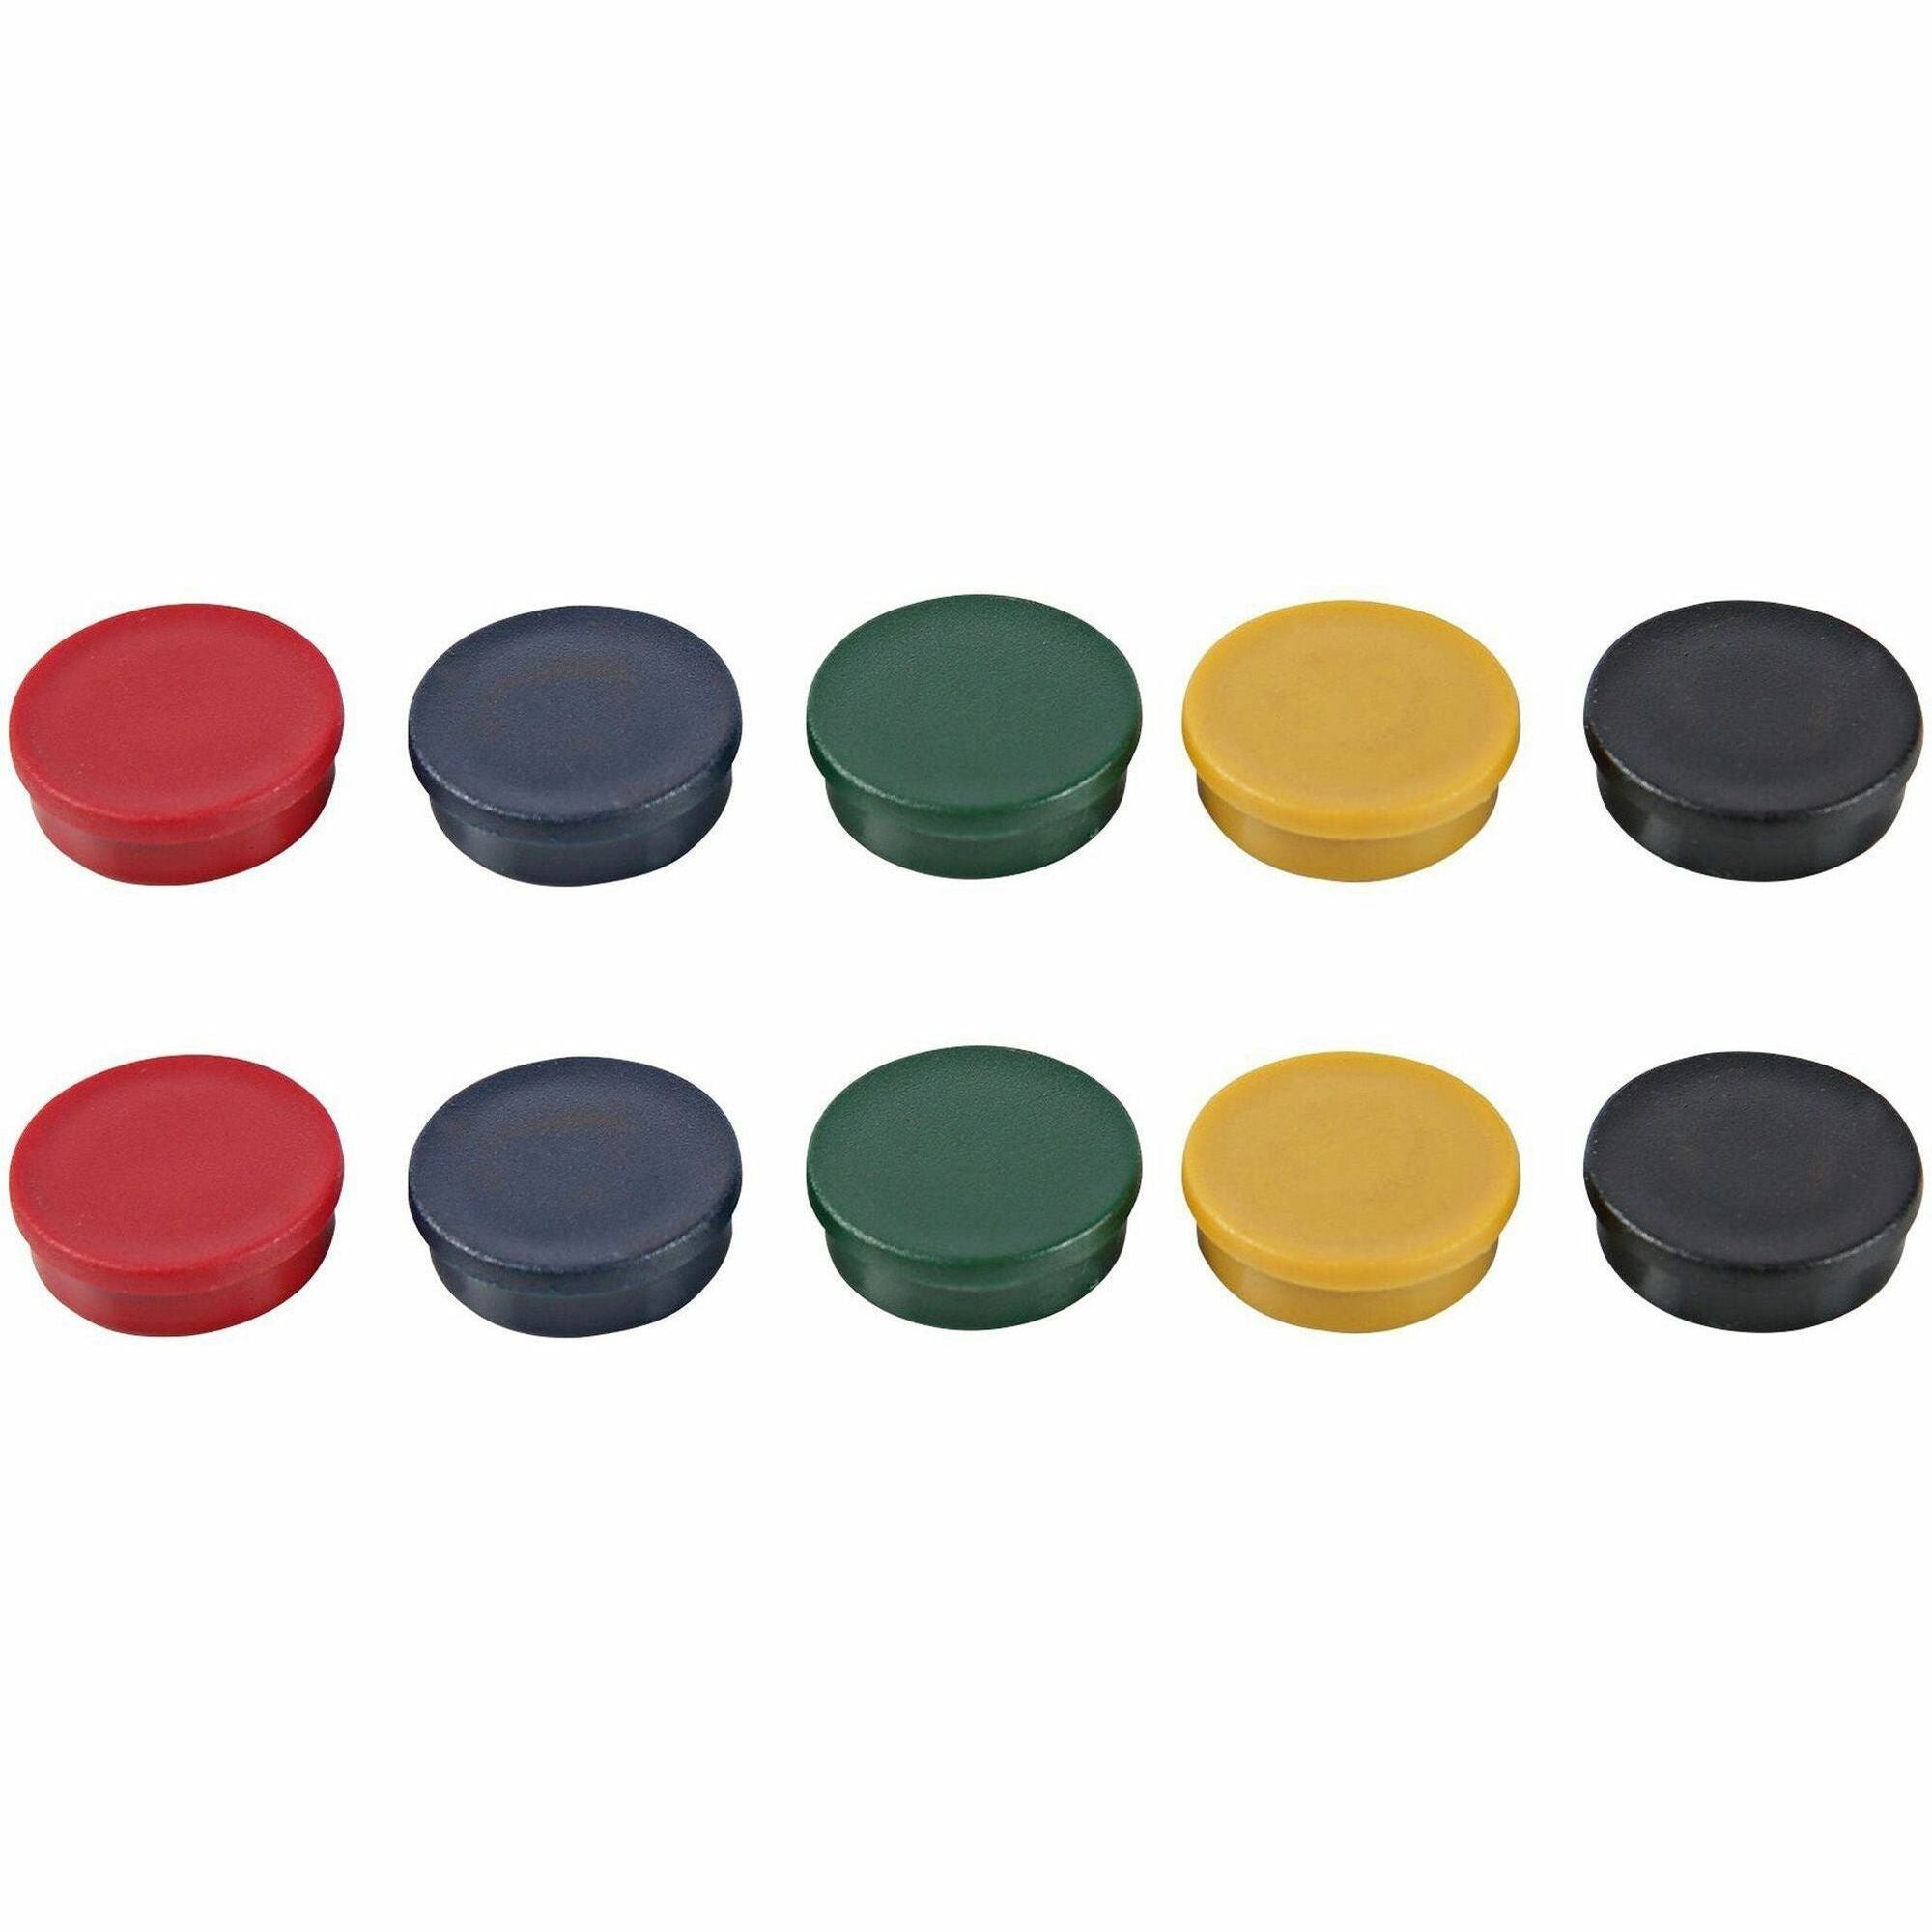 mastervision-planning-board-super-magnets-09-diameter-round-10-pack-gray_bvcim140909 - 1